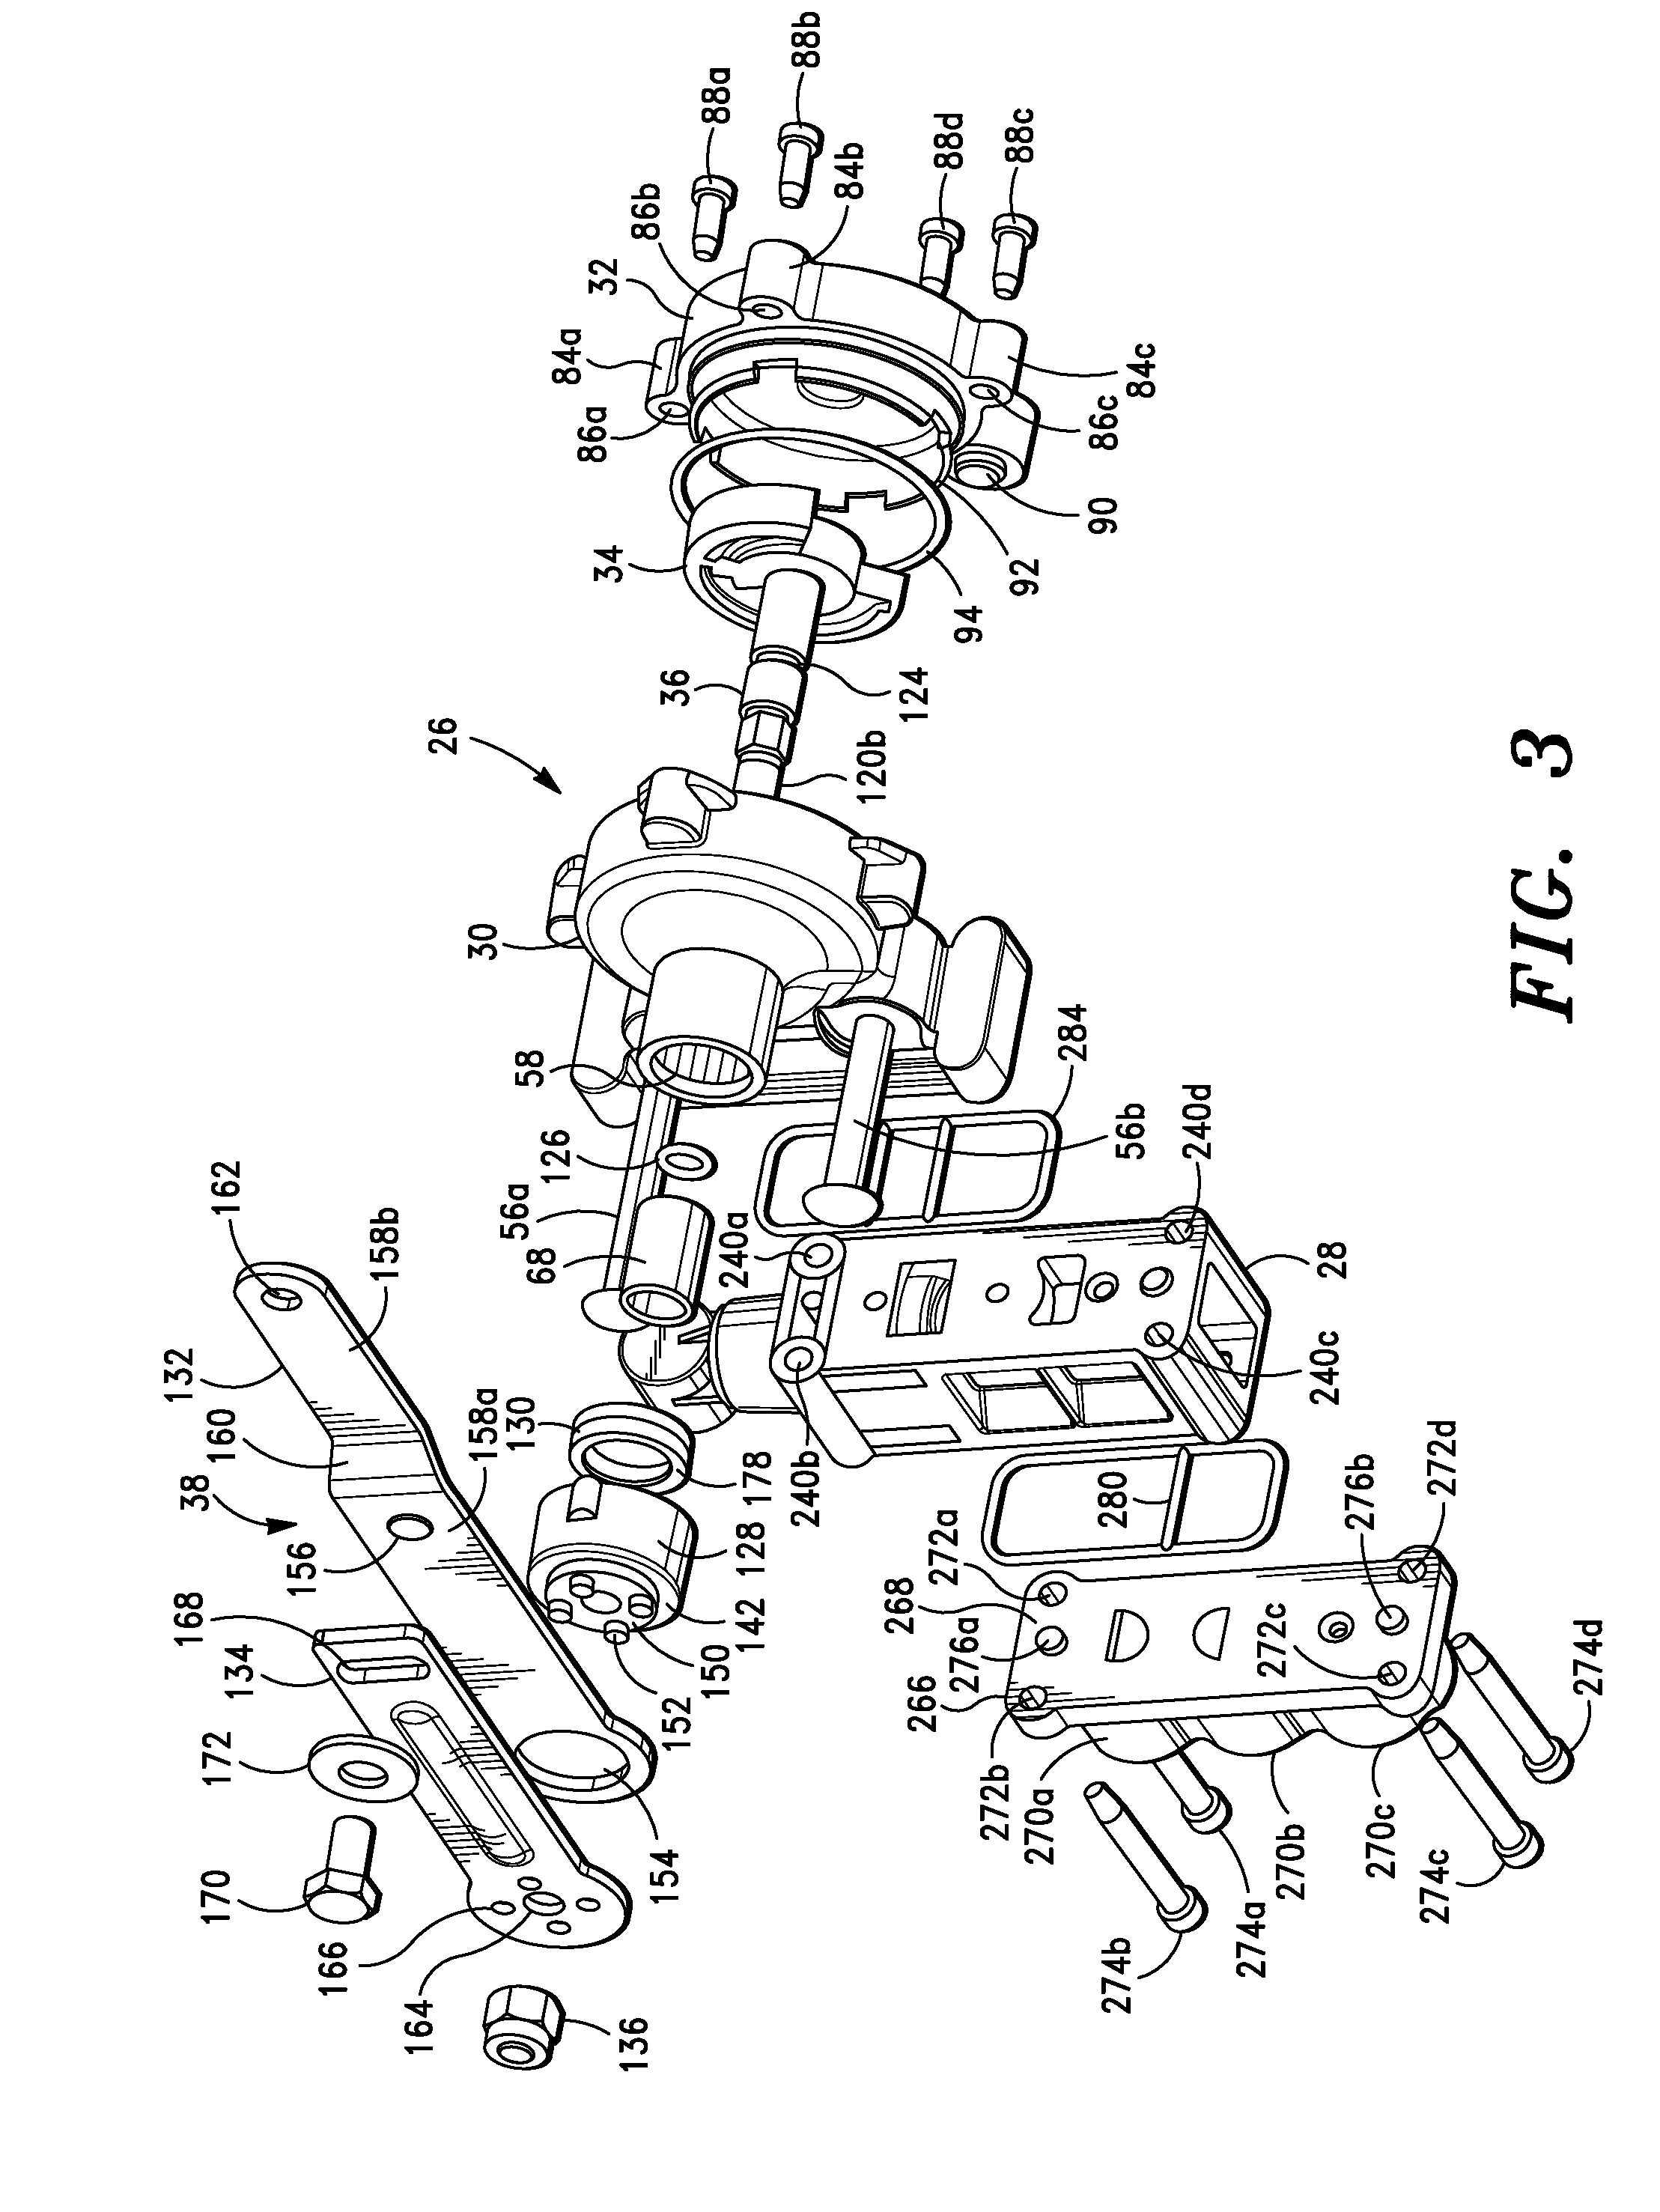 Air suspension height control valve with dual ride height positions